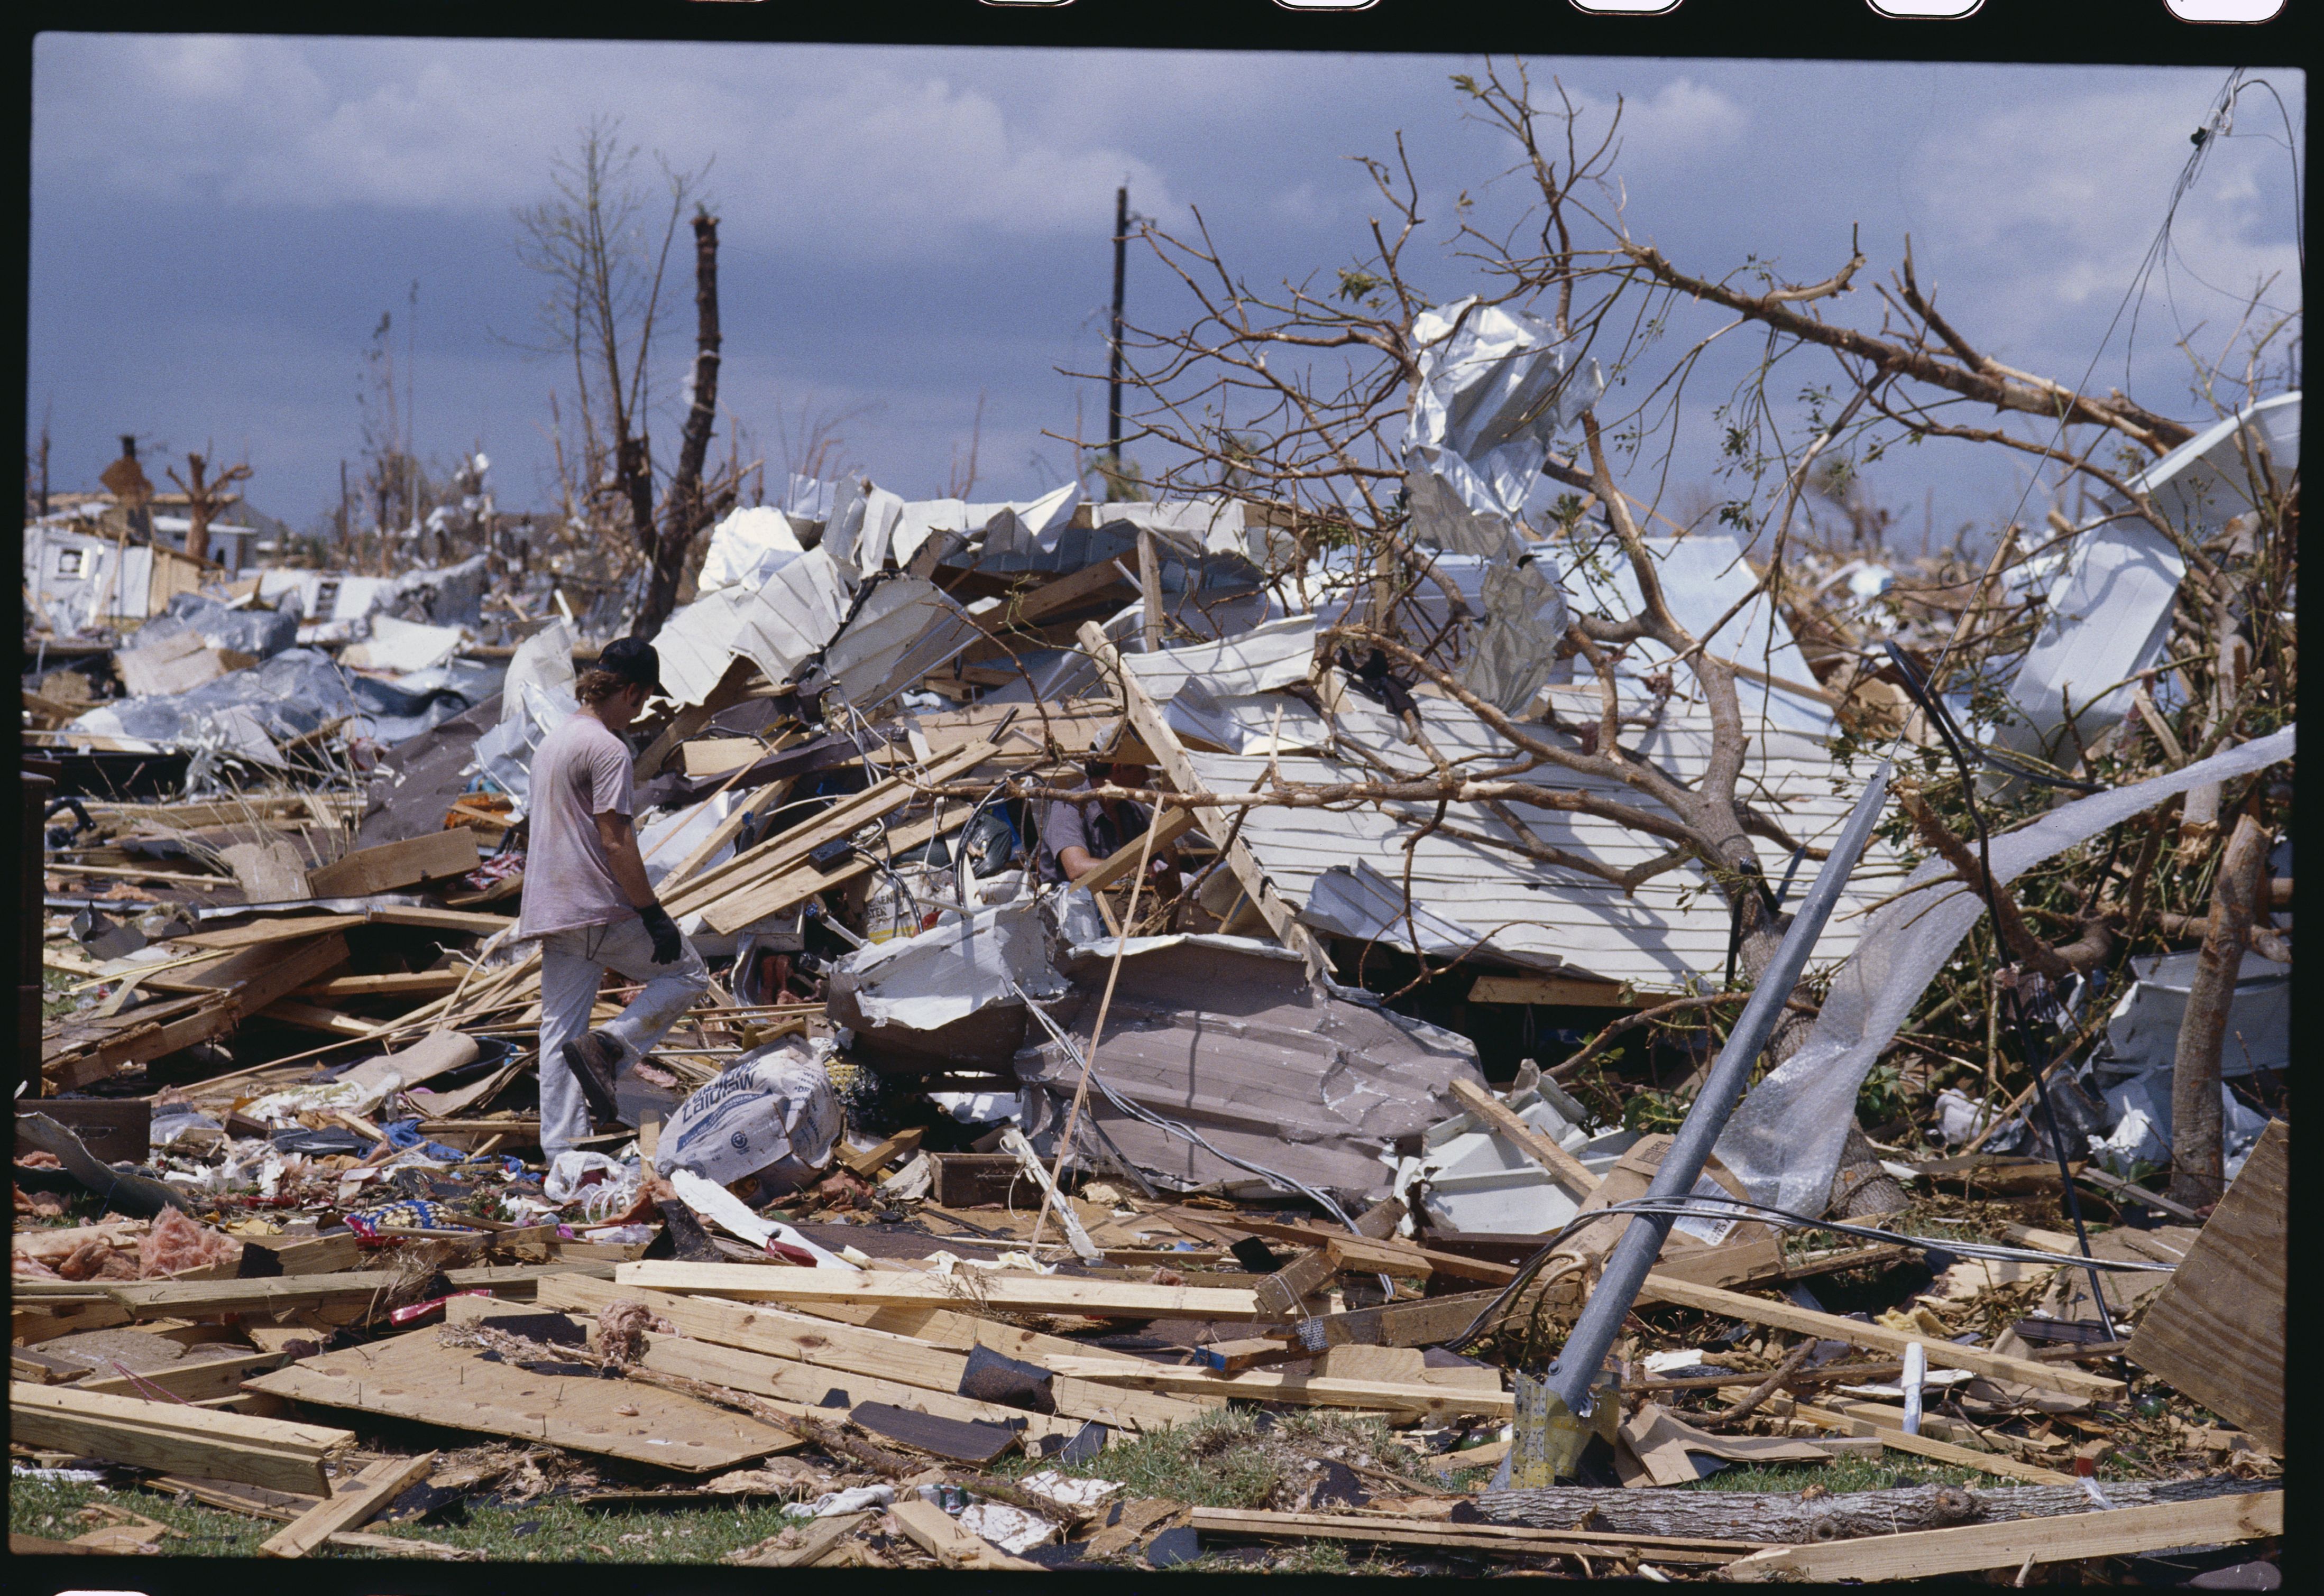 A Homestead resident returns to his home, looking for salvageable items following Hurricane Andrew